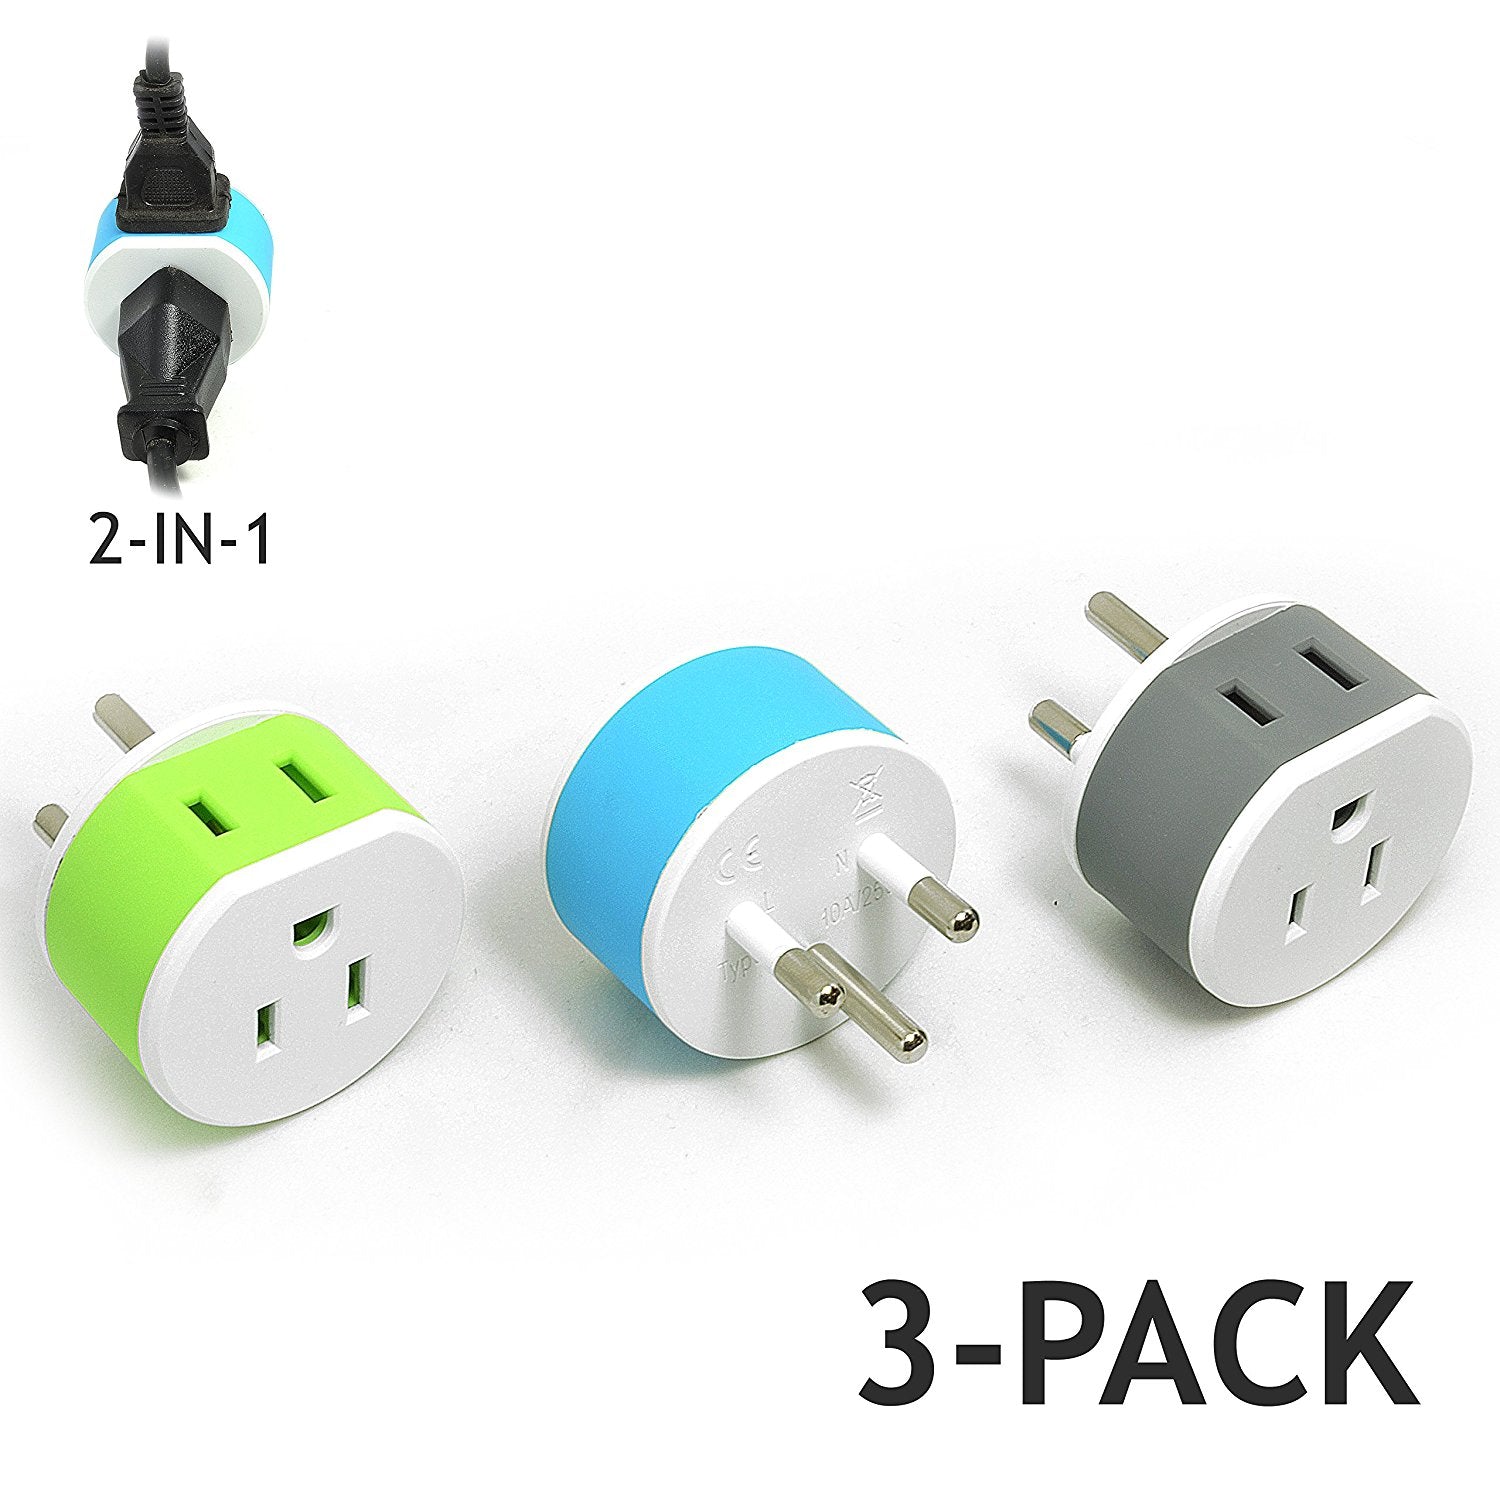 travel adaptor needed for thailand